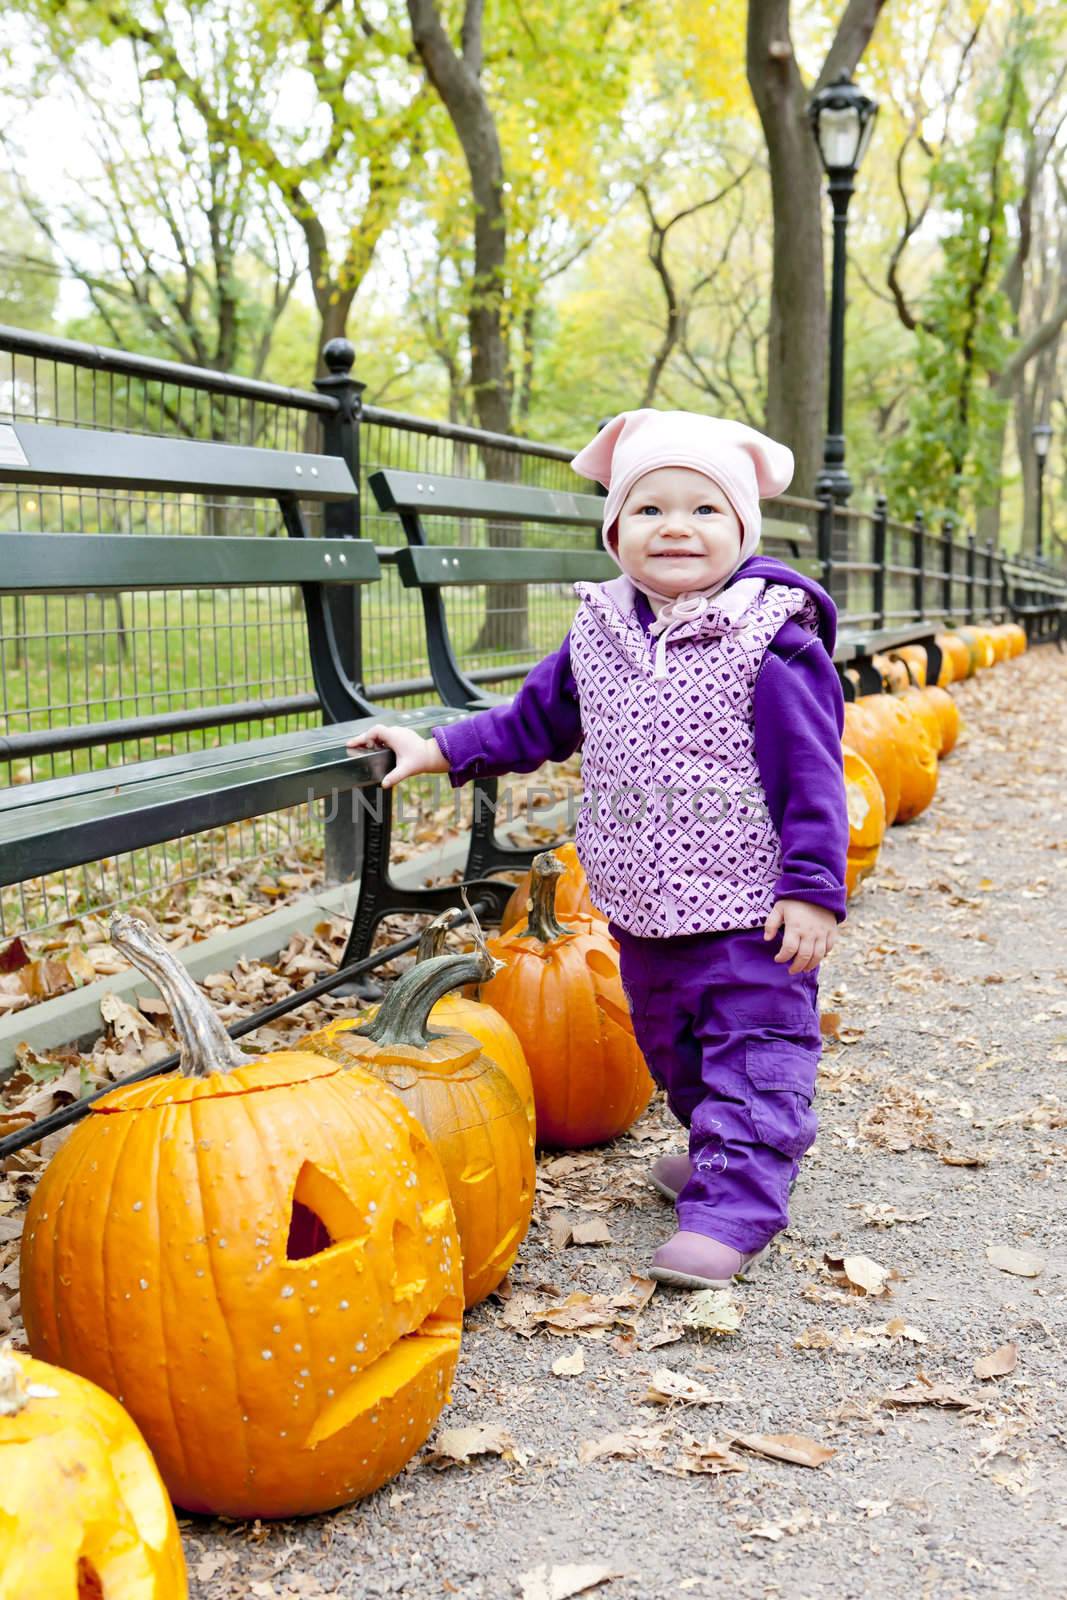 little girl in autumnal Central Park, New York City, USA by phbcz